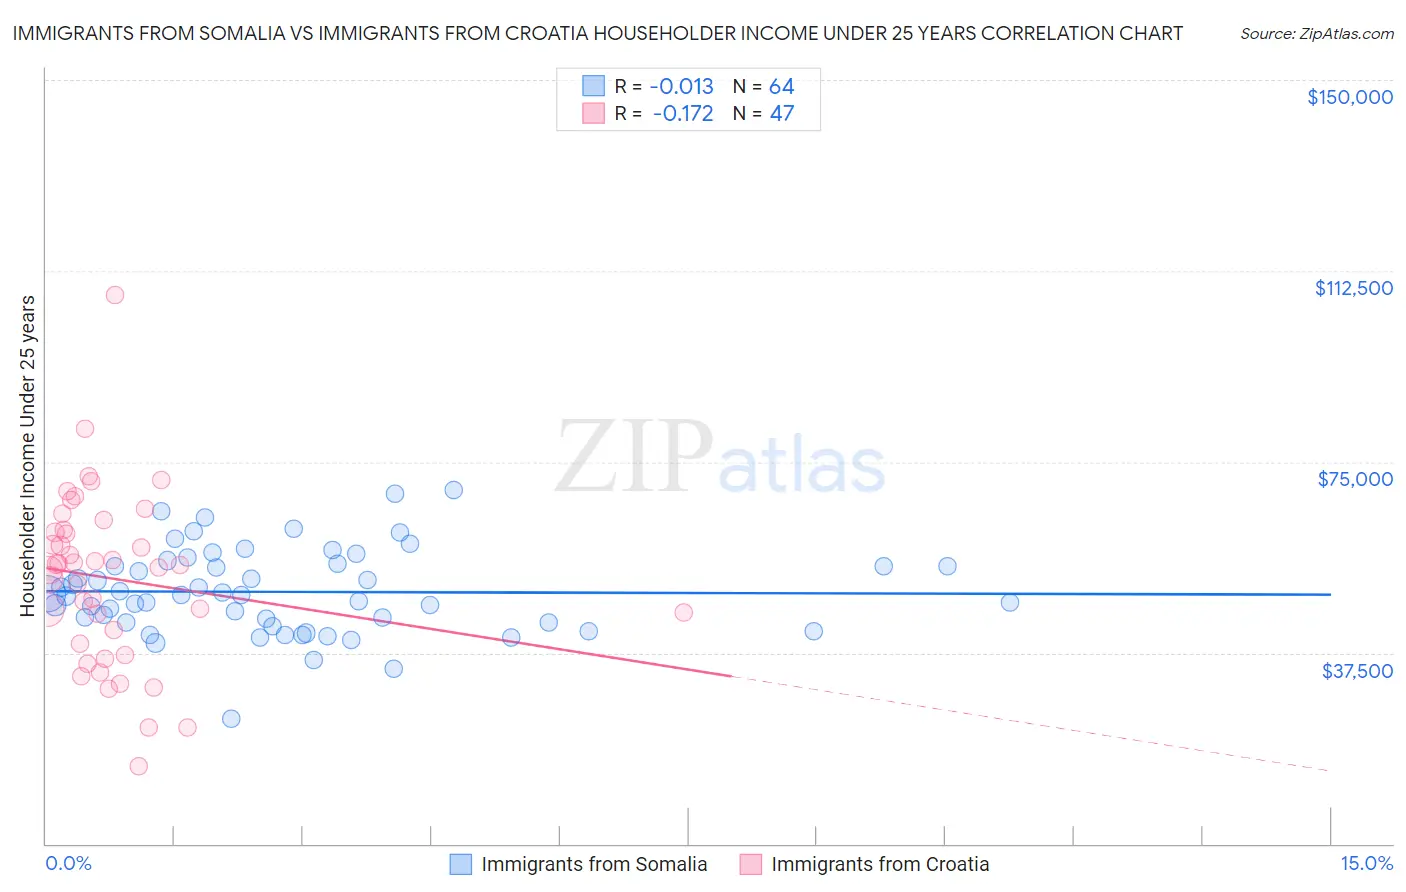 Immigrants from Somalia vs Immigrants from Croatia Householder Income Under 25 years